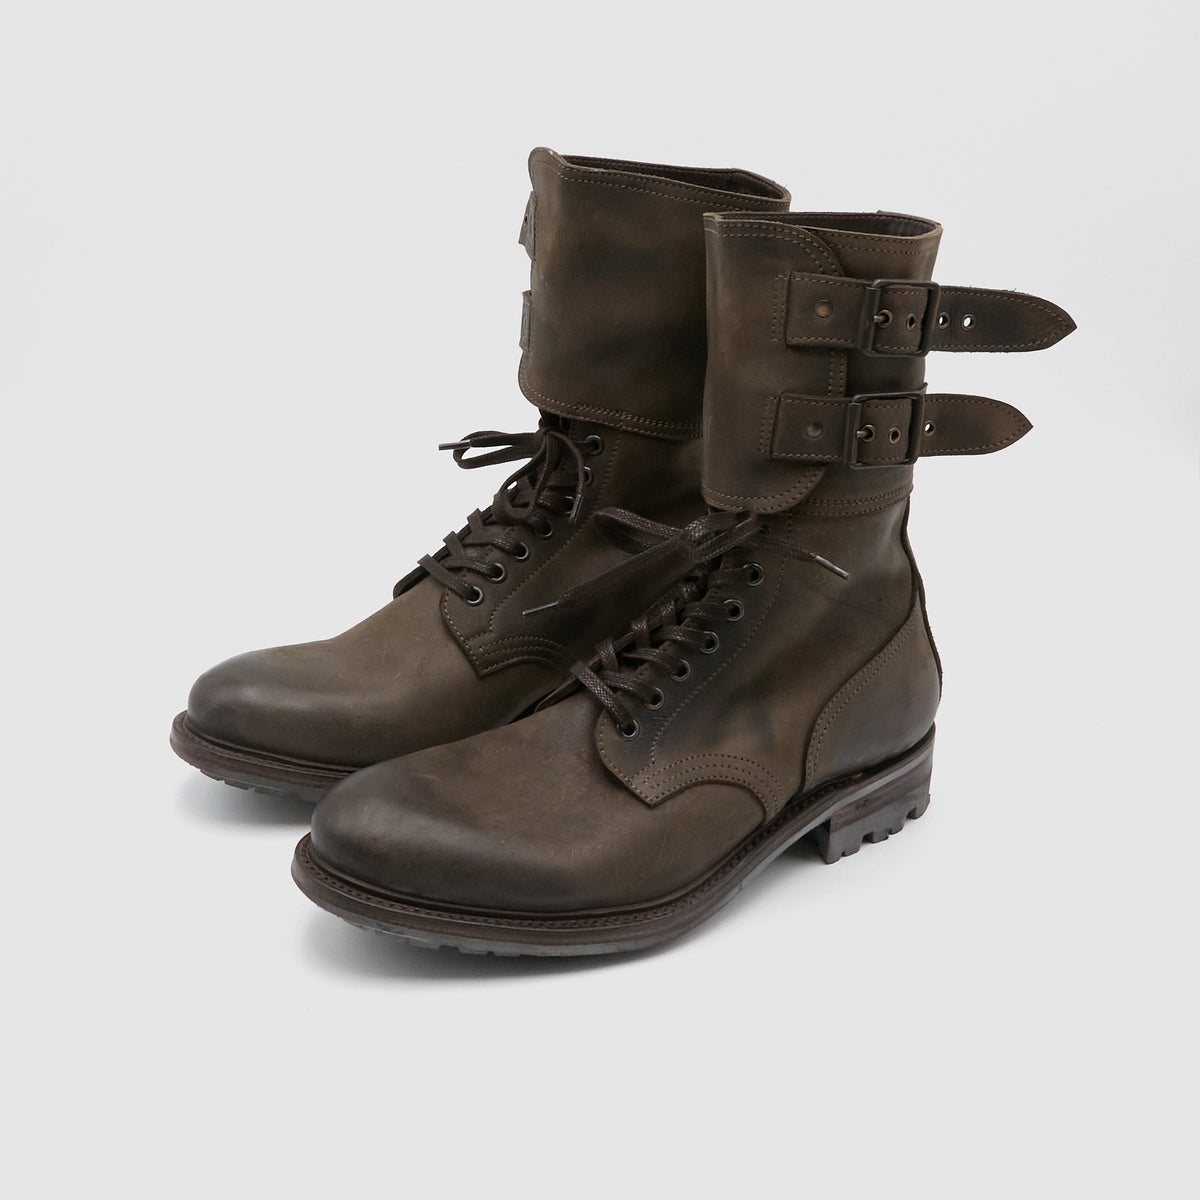 n.d.c. made by hand Waxed Kudu Leather Boots